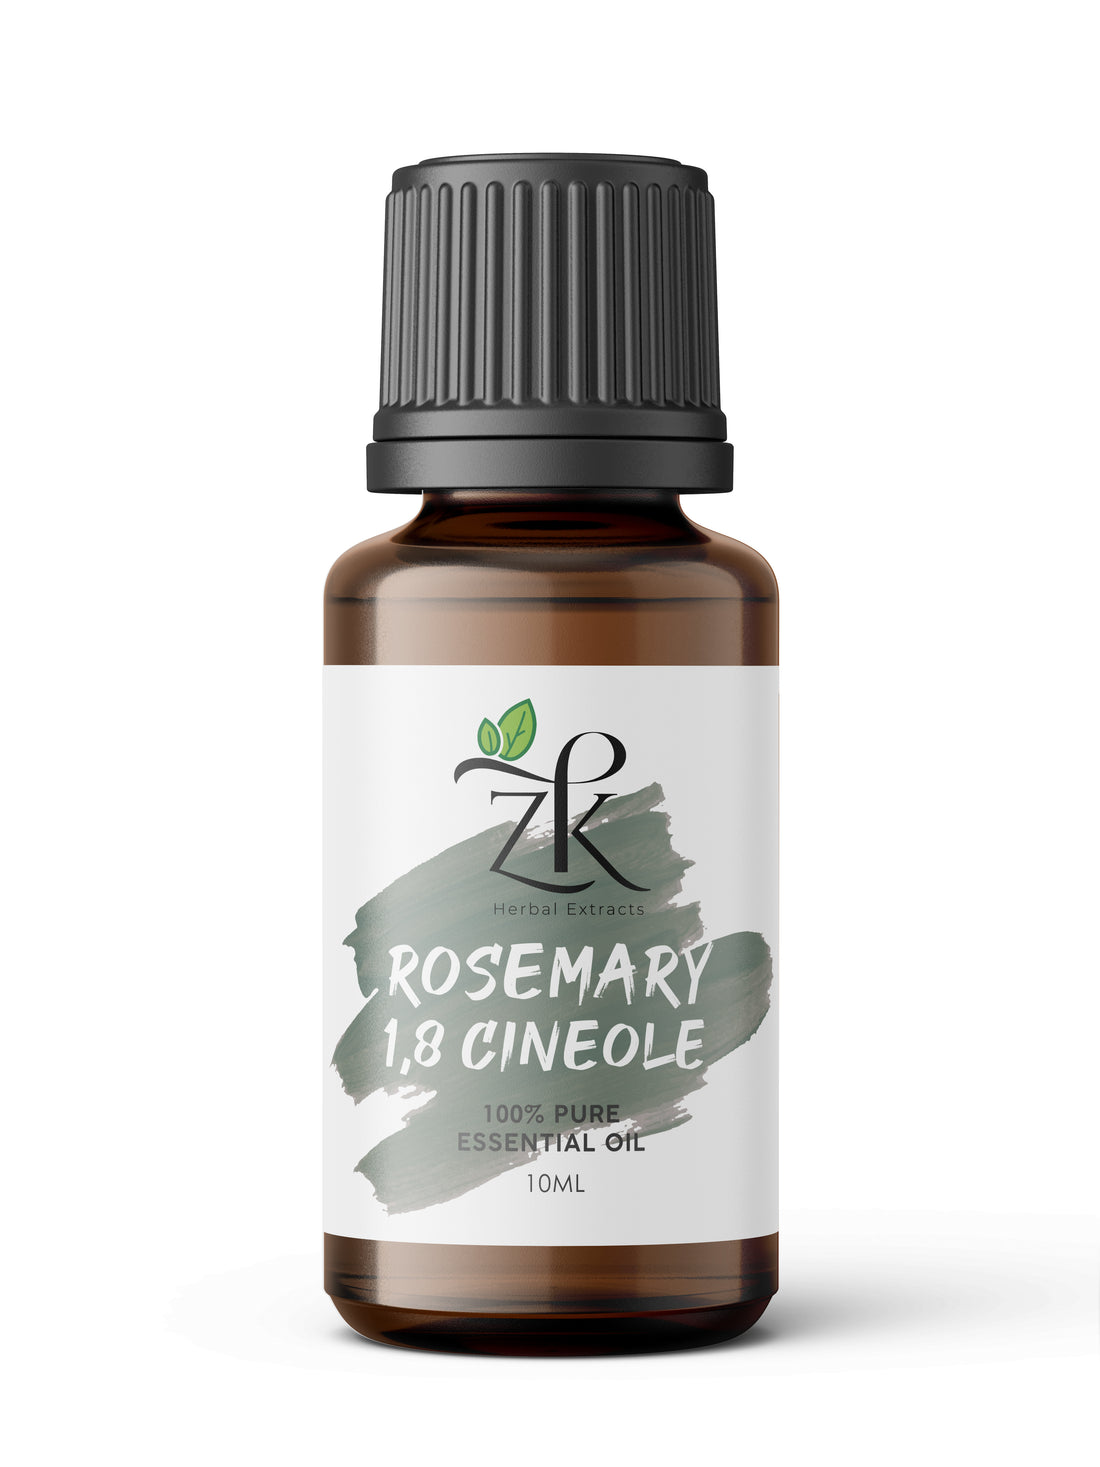 ZK Rosemary 1,8-Cineole Essential Oil 10mL